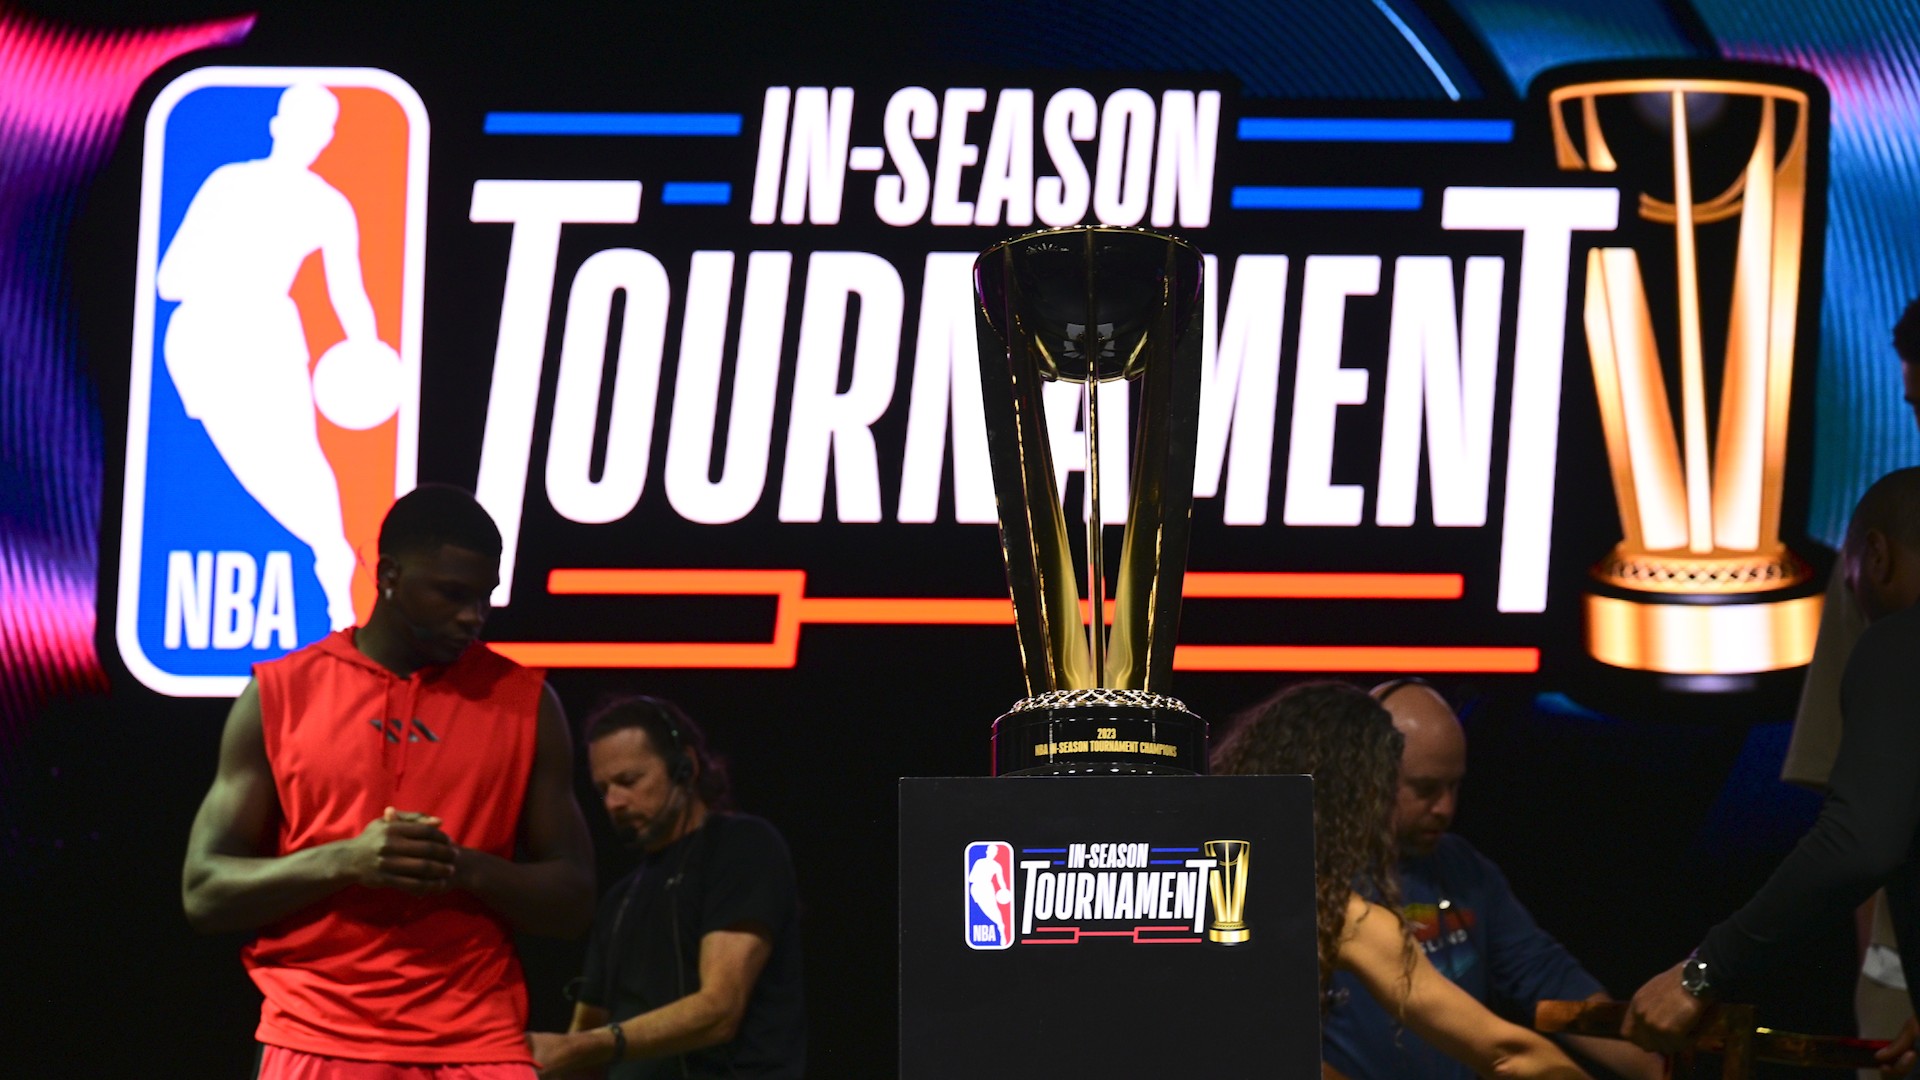 NBA Releases Details Of League's First In-Season Tournament I CBS